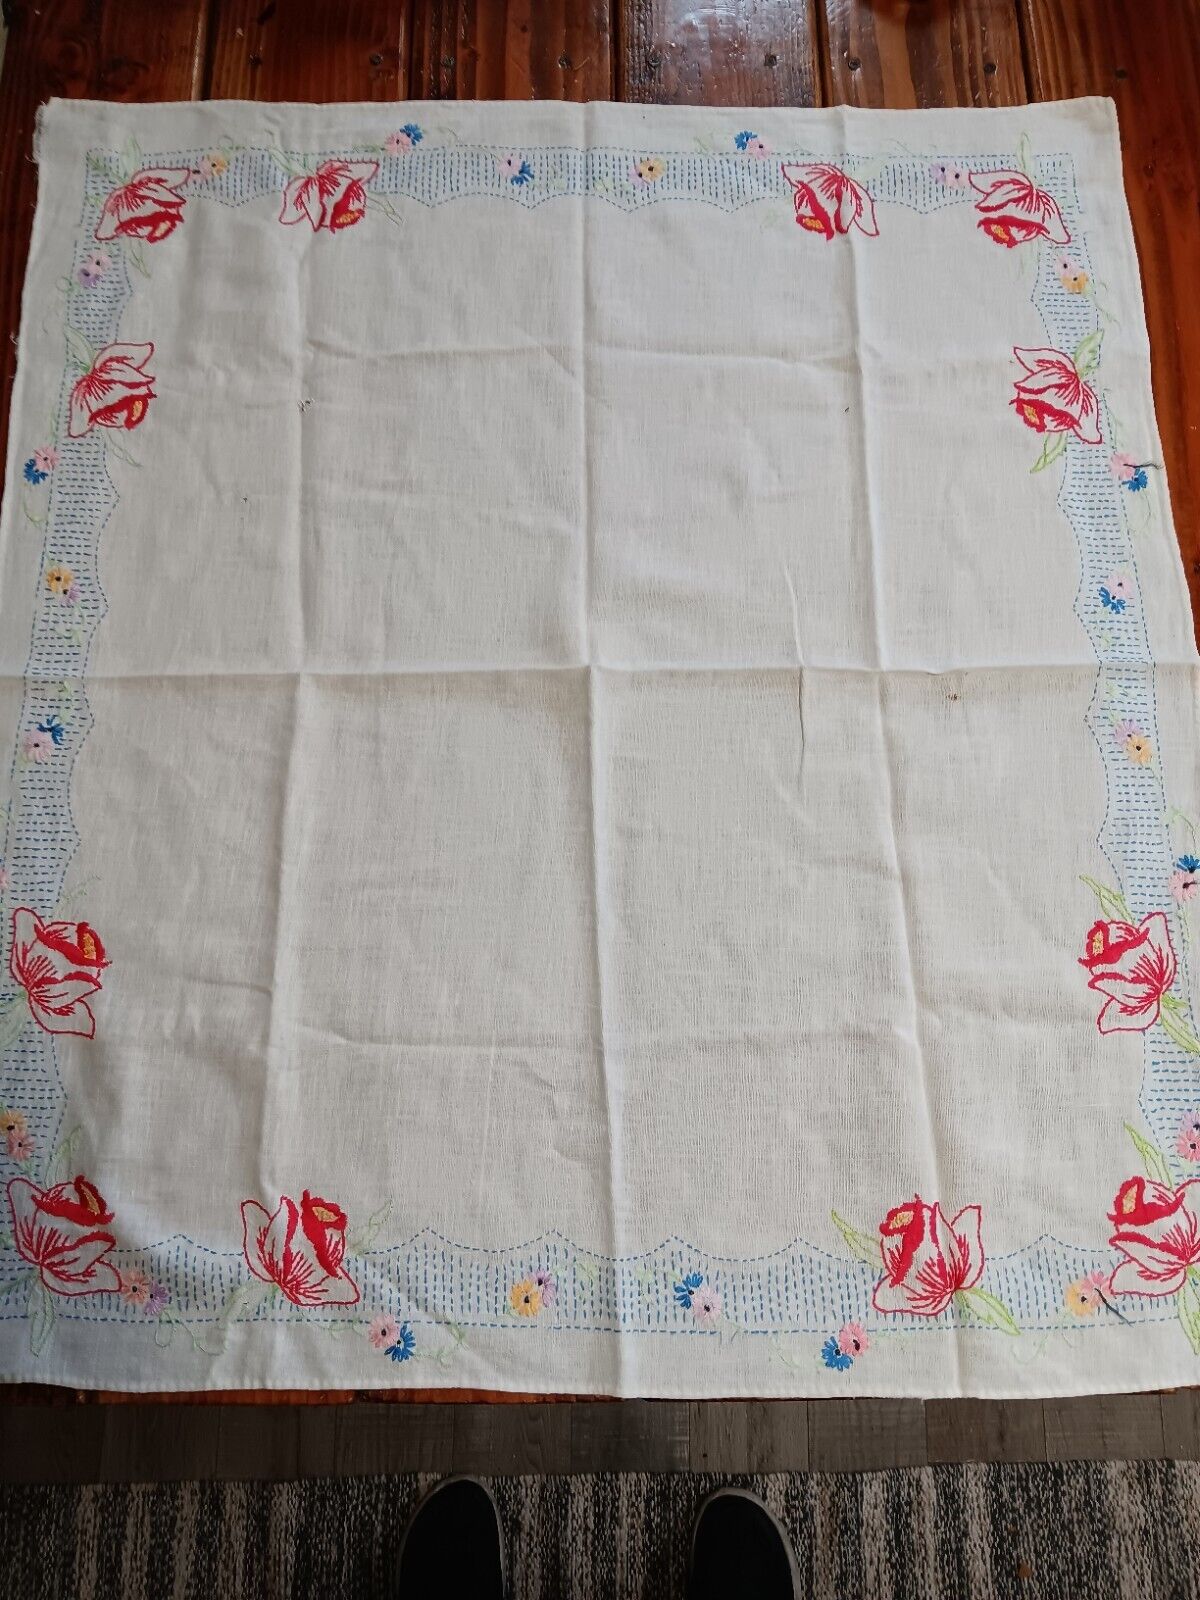 Vintage Embroidered Tablecloth Roses